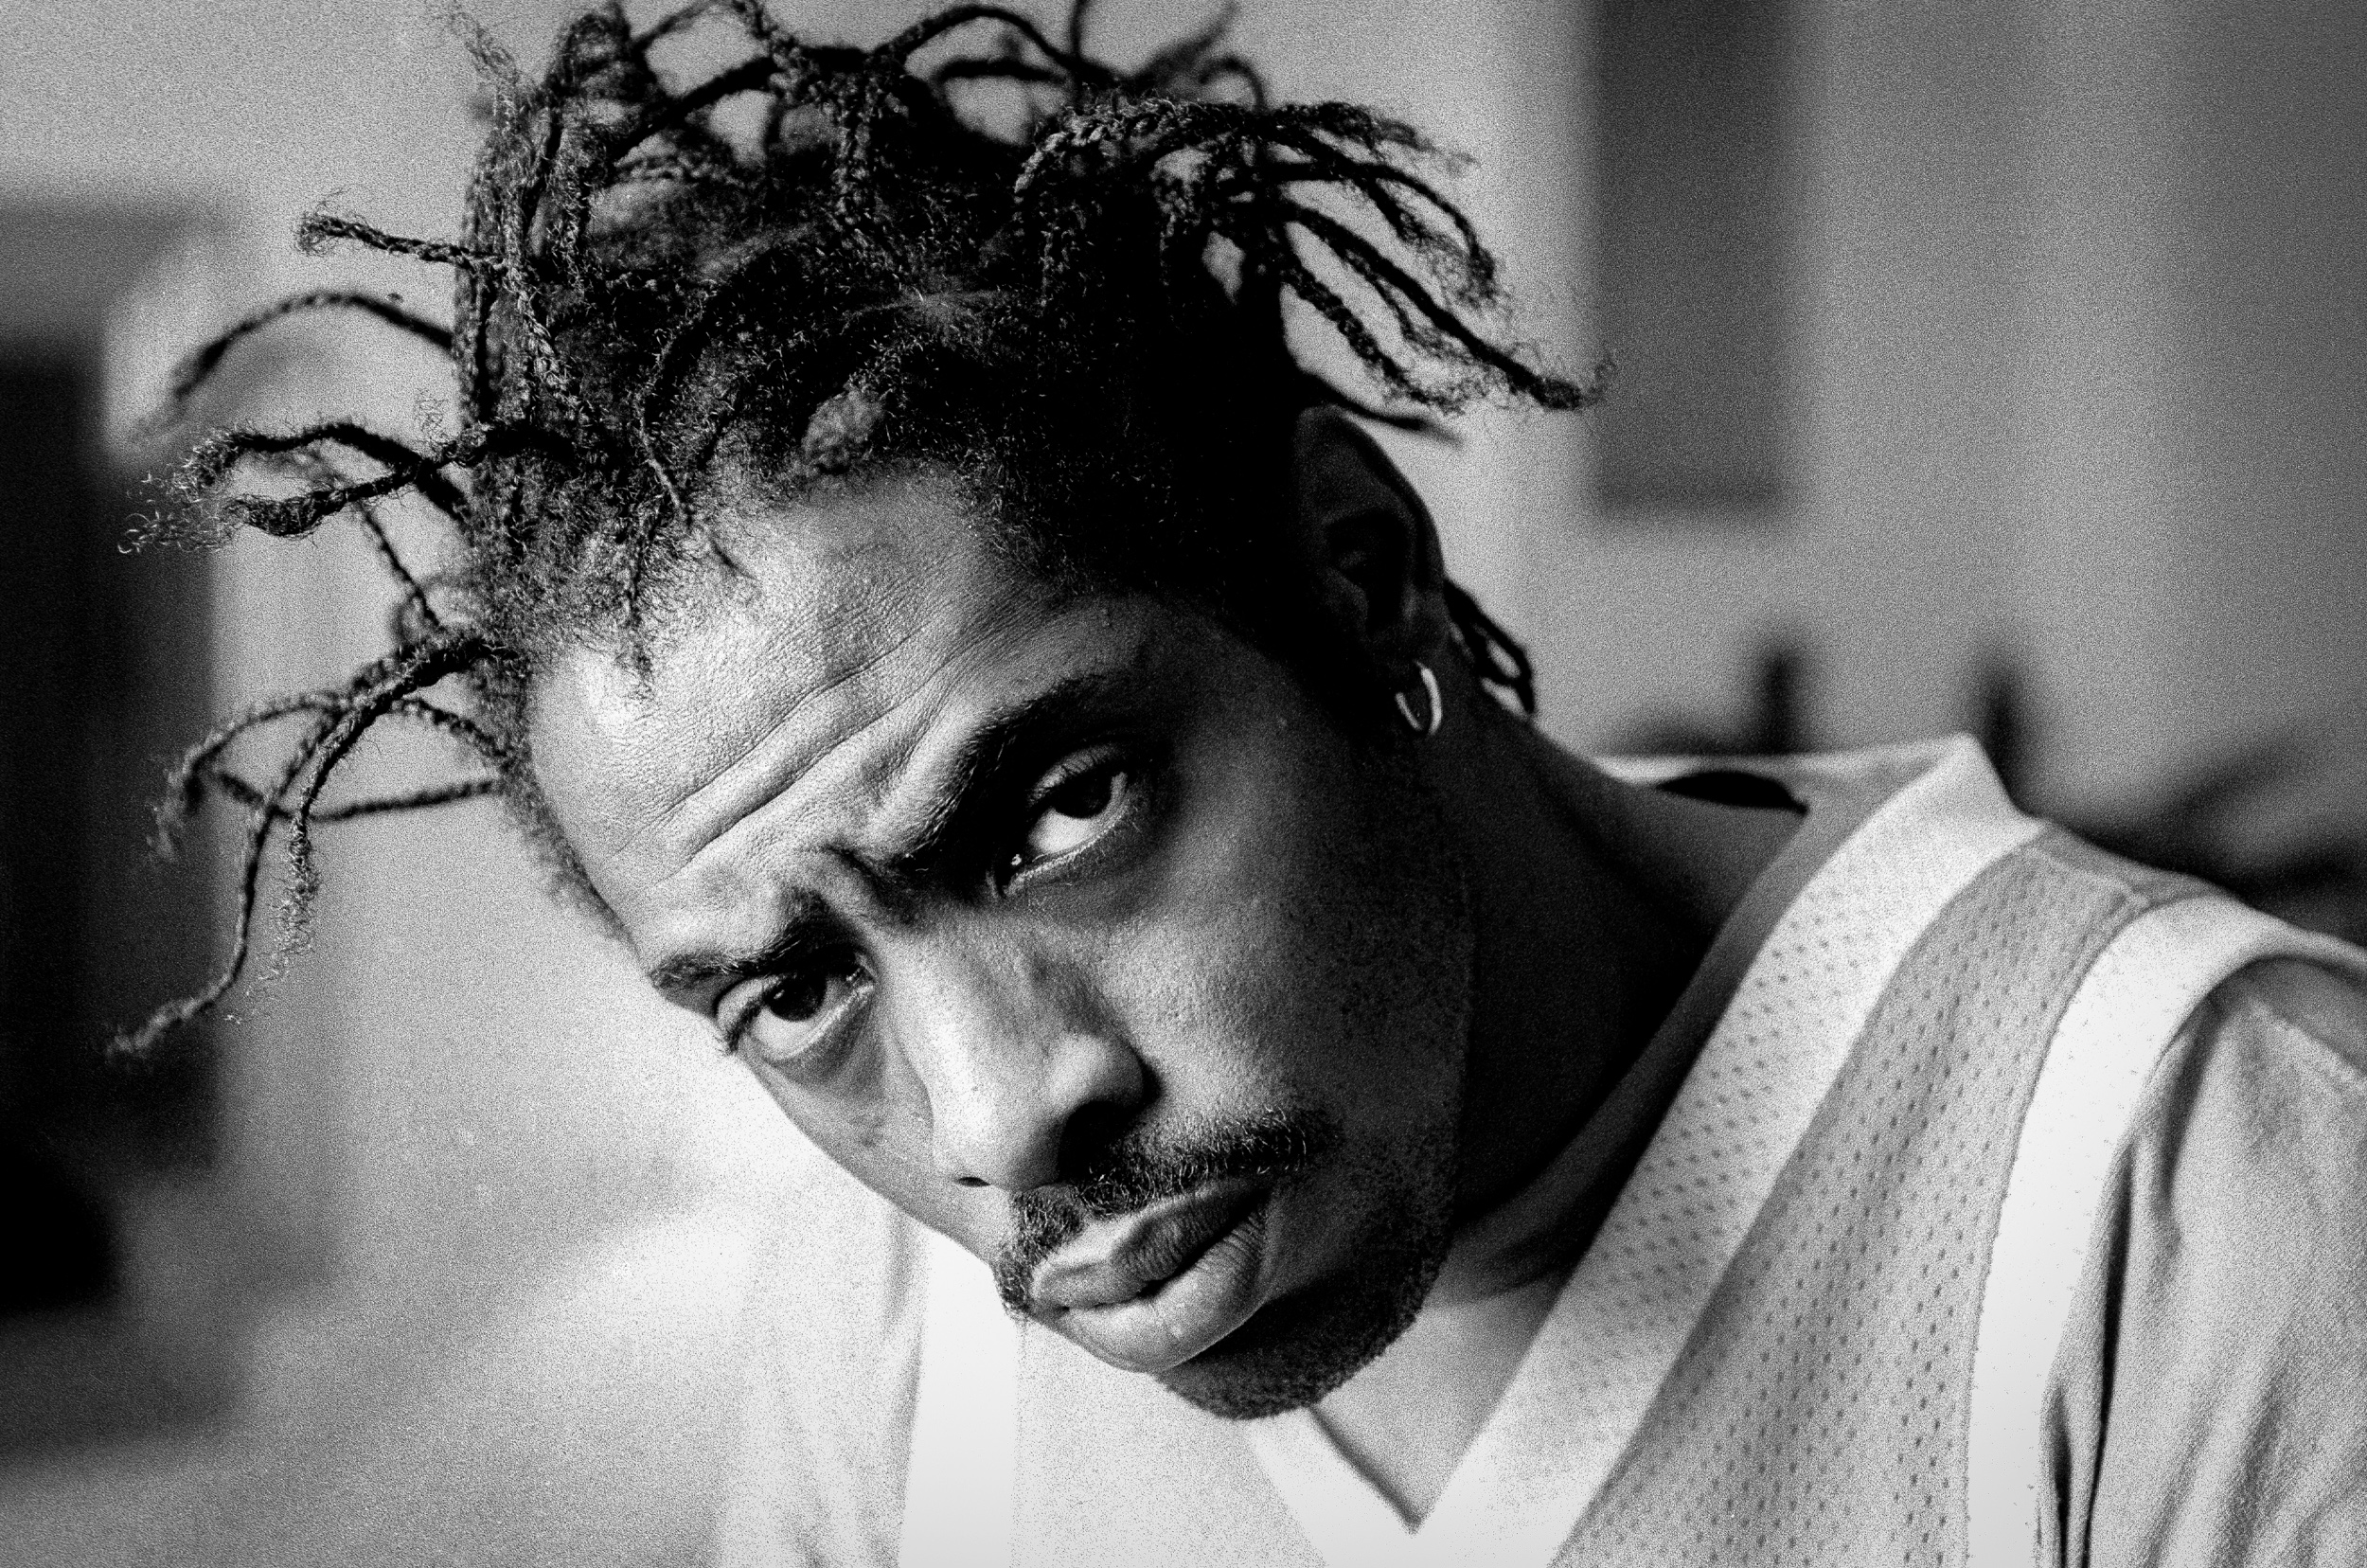 Coolio, the '90s rapper who lit up the music charts with hits like "Gangsta's Paradise" and "Fantas...